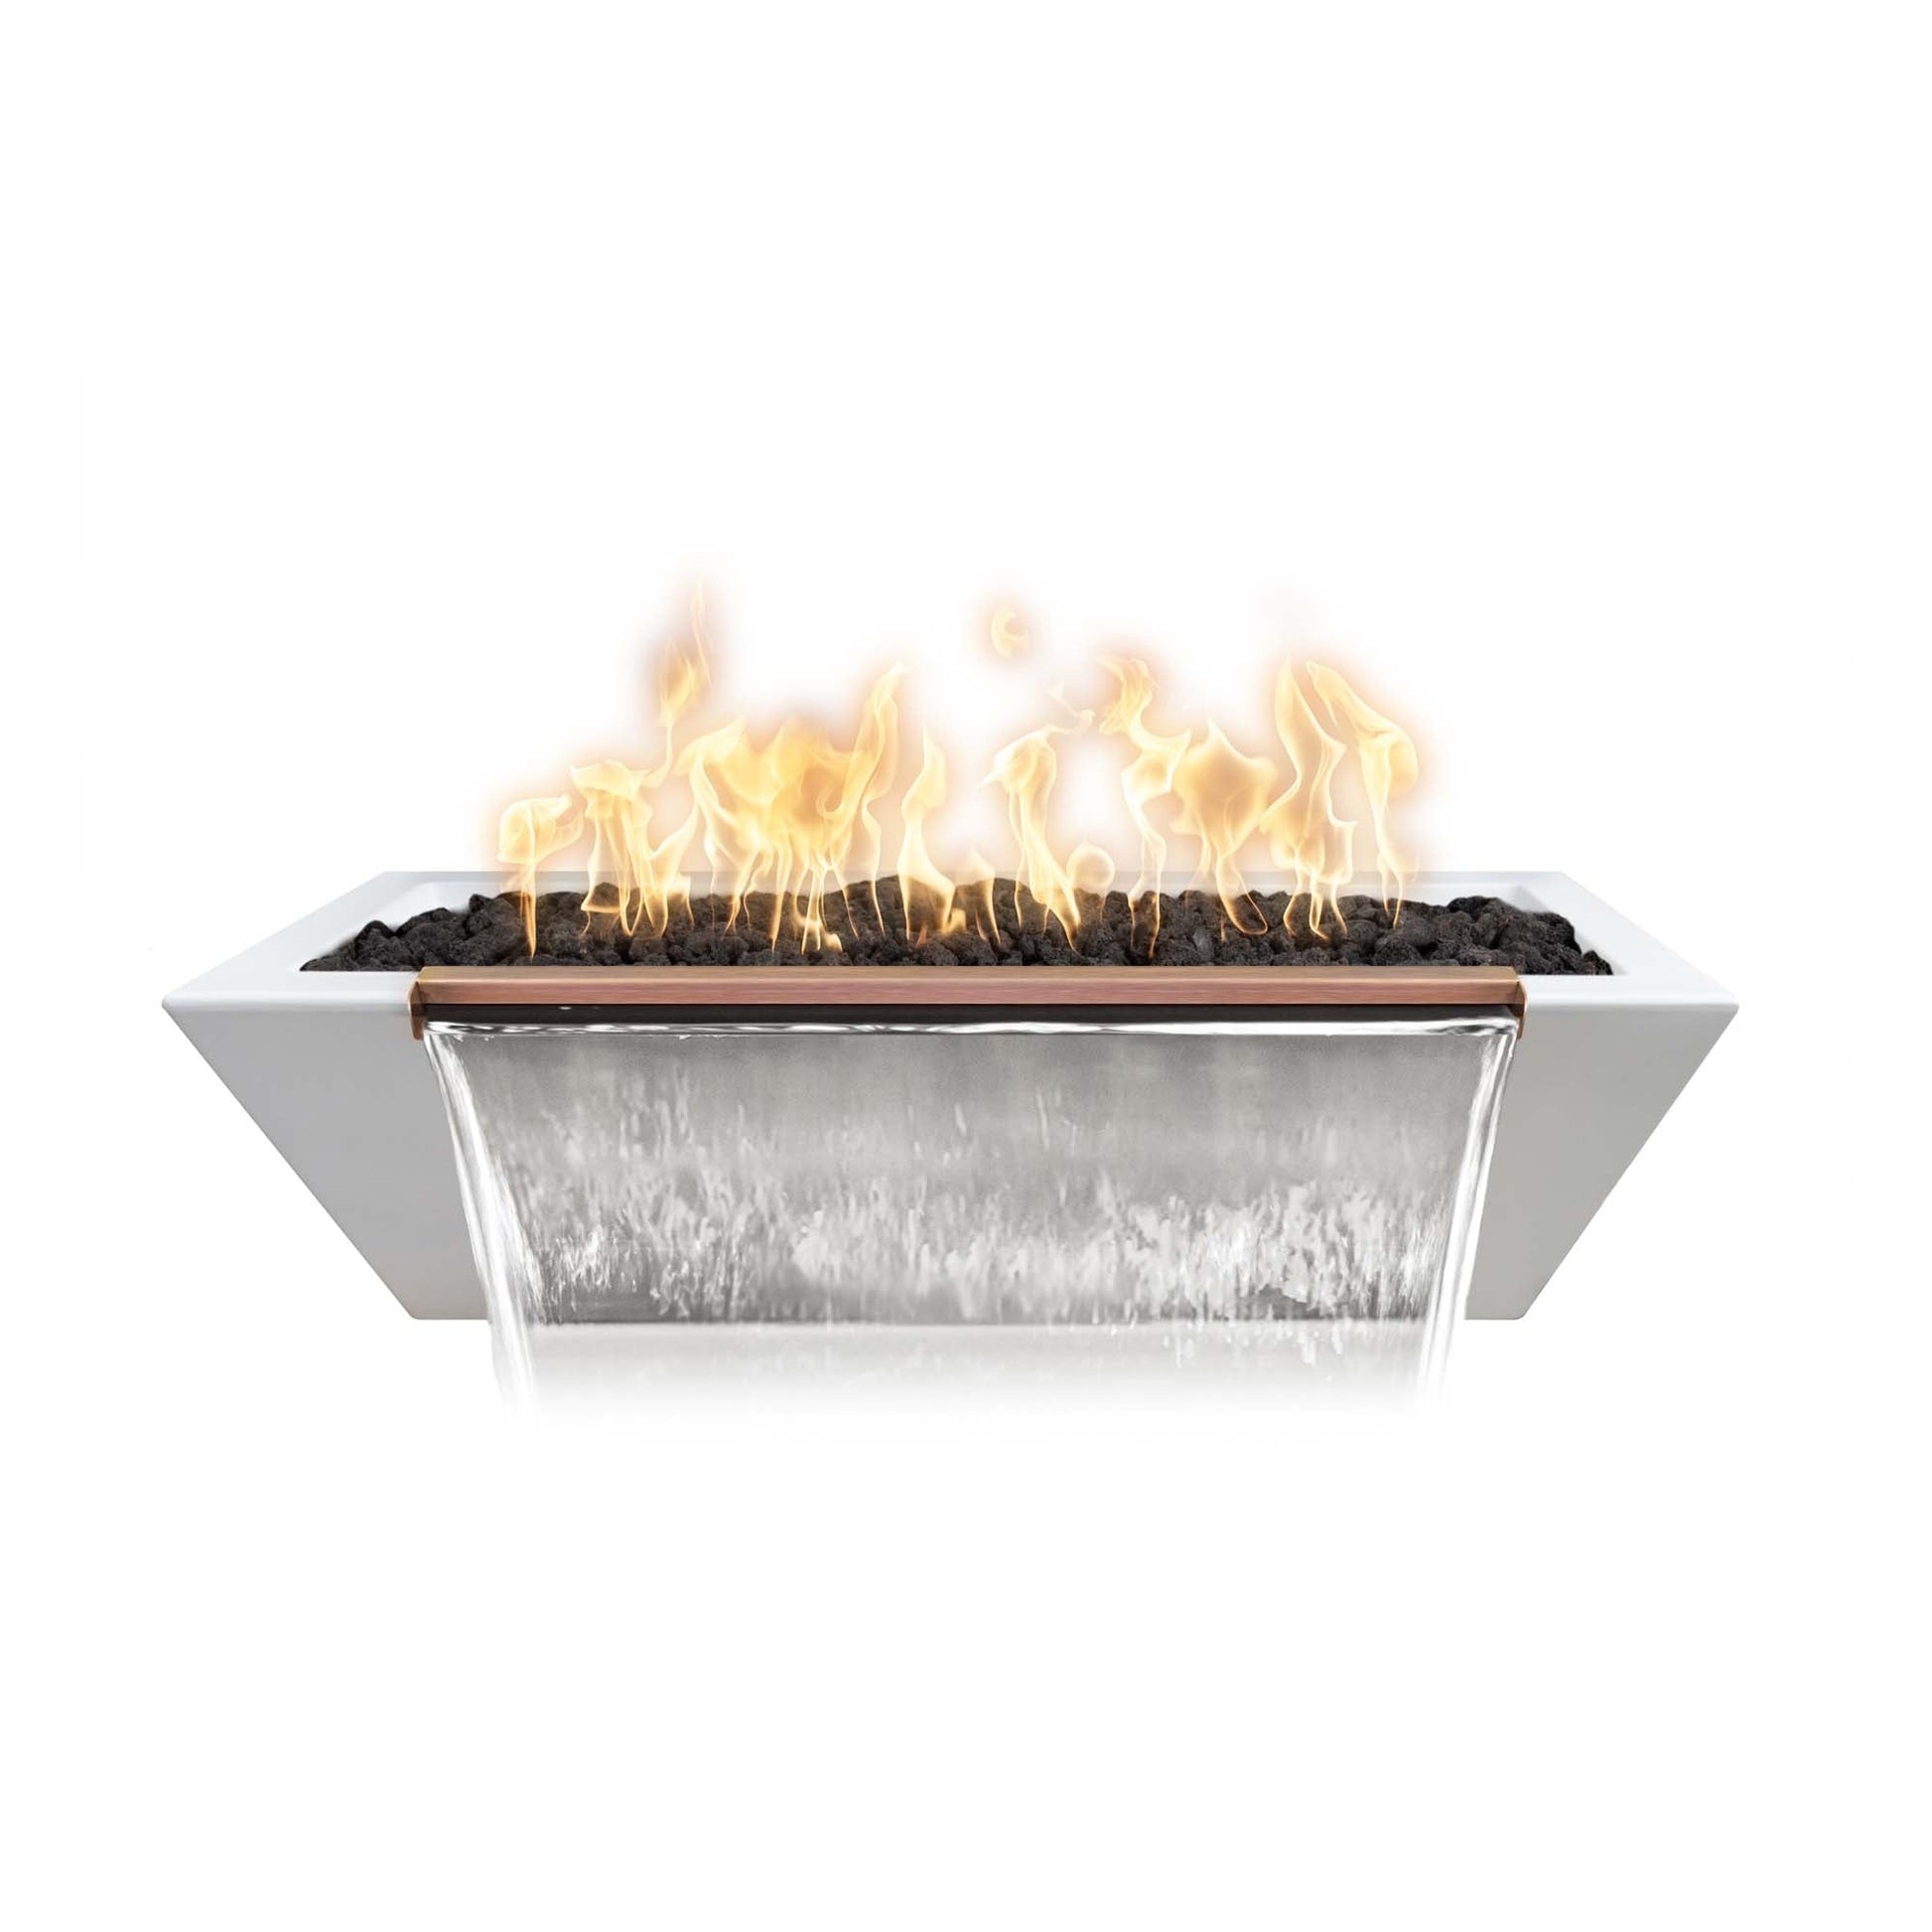 The Outdoor Plus Linear Maya 60" Chocolate GFRC Concrete Liquid Propane Fire & Water Bowl with Match Lit with Flame Sense Ignition